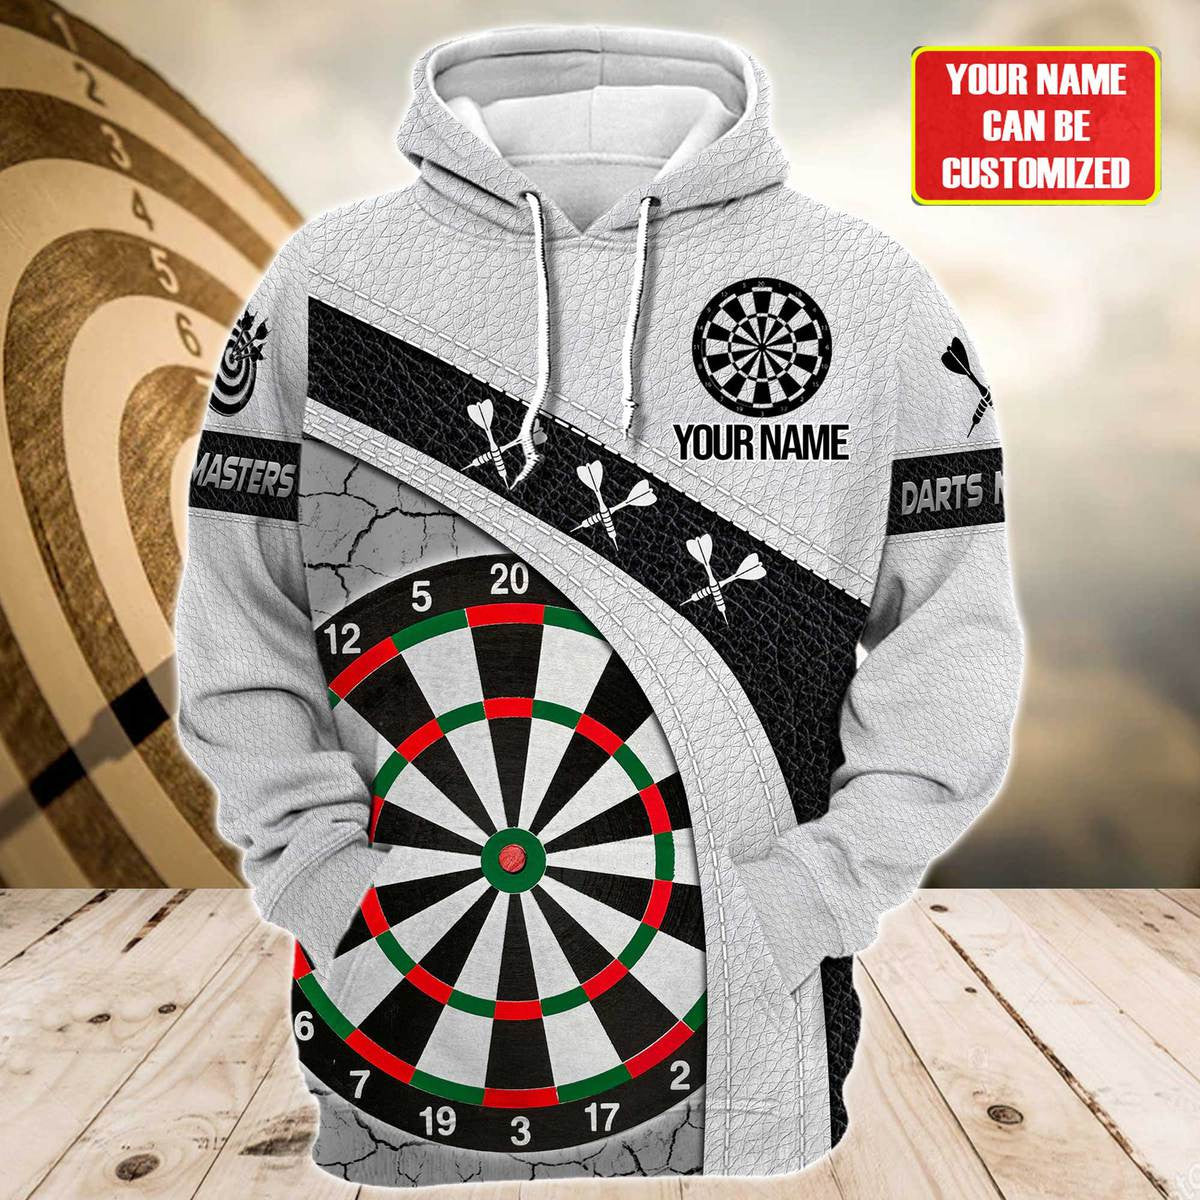 Personalized Name Darts Player Black and White Leather All Over Printed Unisex Hoodie Zip Hoodie Shirt